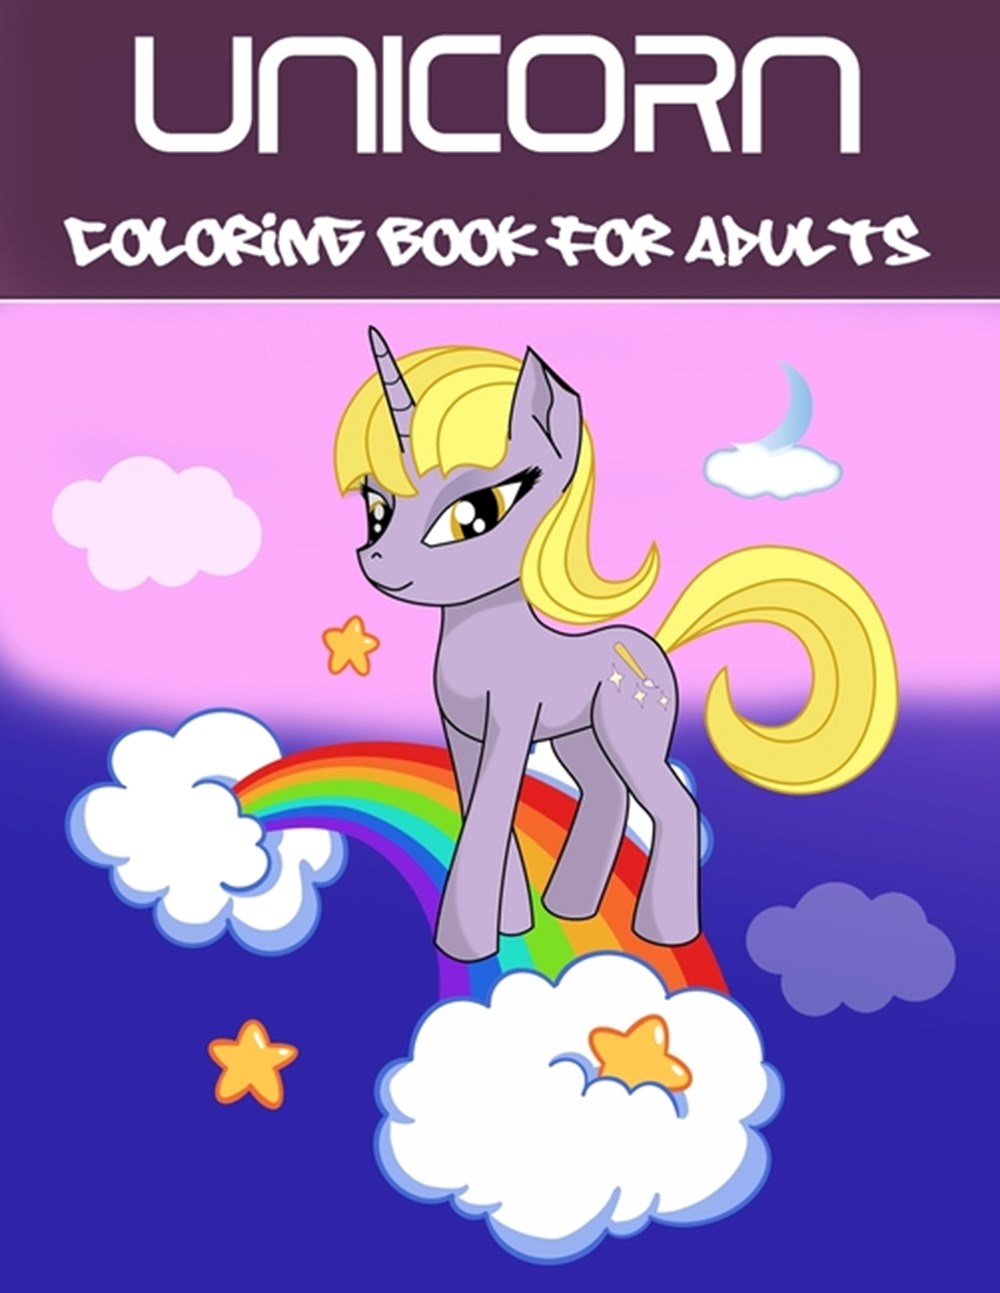 Unicorn Coloring Book For Adults: A Fantasy Coloring Book with Magical Unicorns, Beautiful Flowers, 